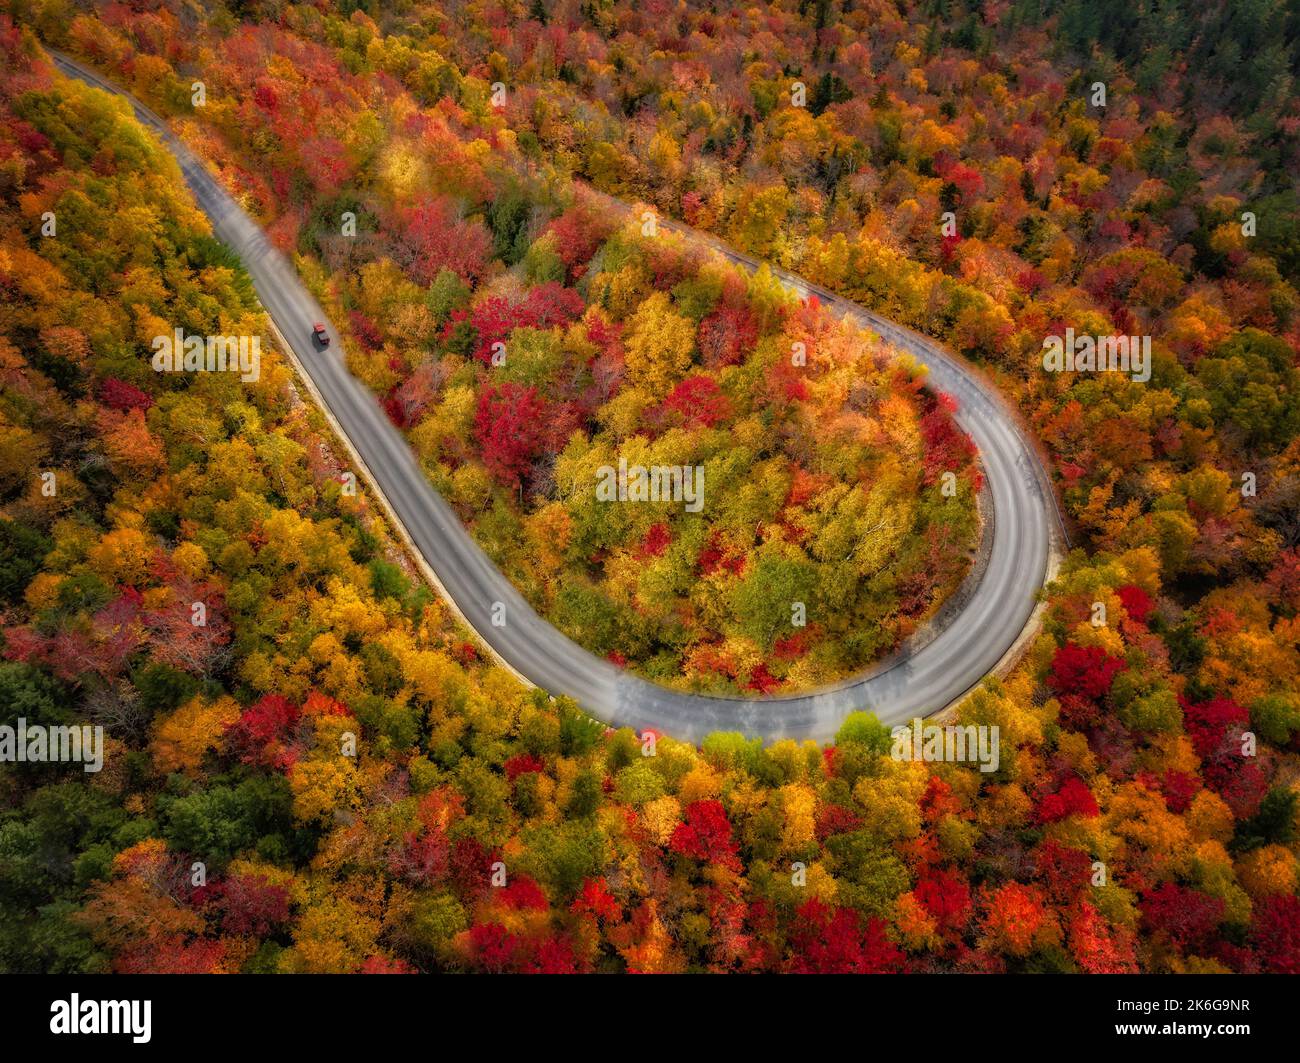 White Mountains NH Fall Foliage Banque D'Images